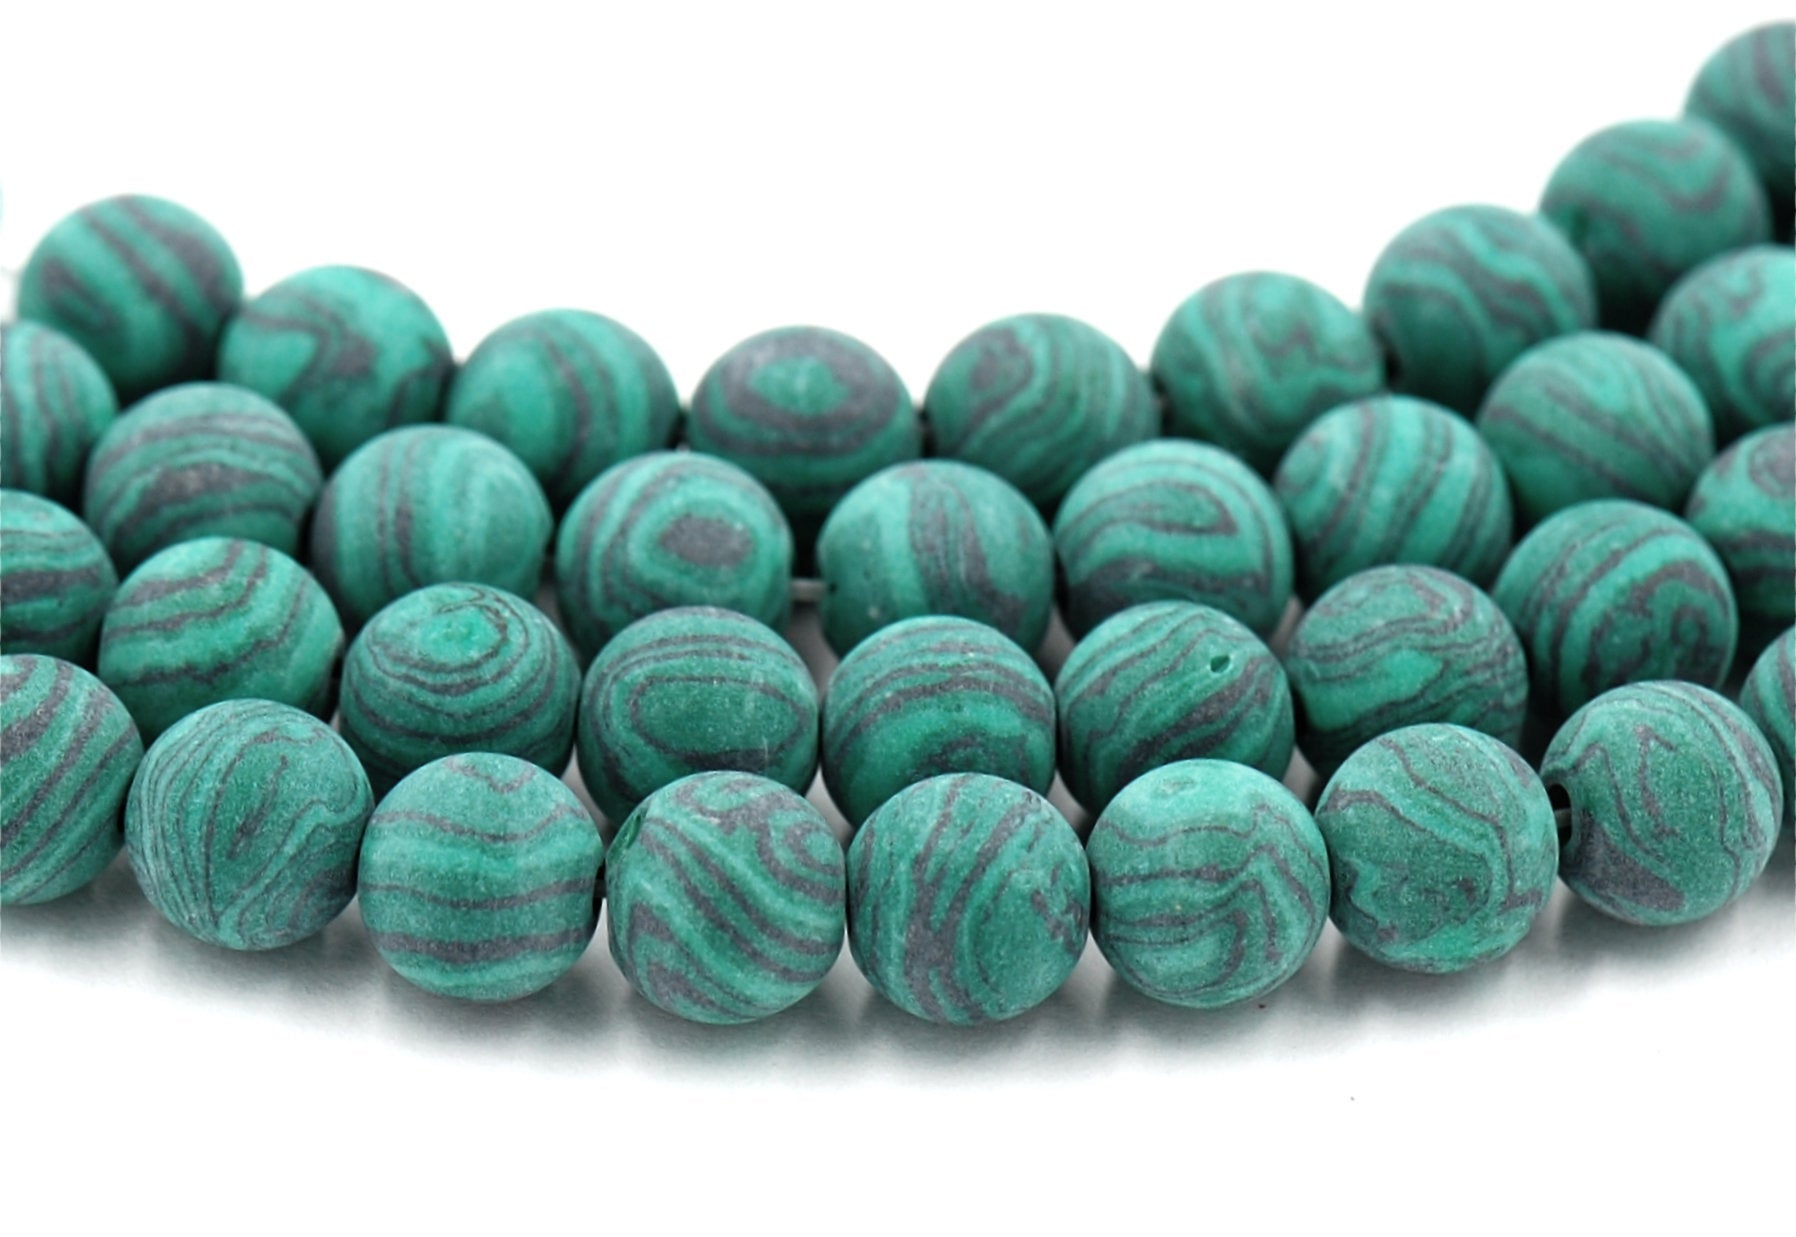 Synthetic Matte Malachite Beads Strands, Dyed, Round, green, 4mm, 6mm,8mm,10mm -full strand